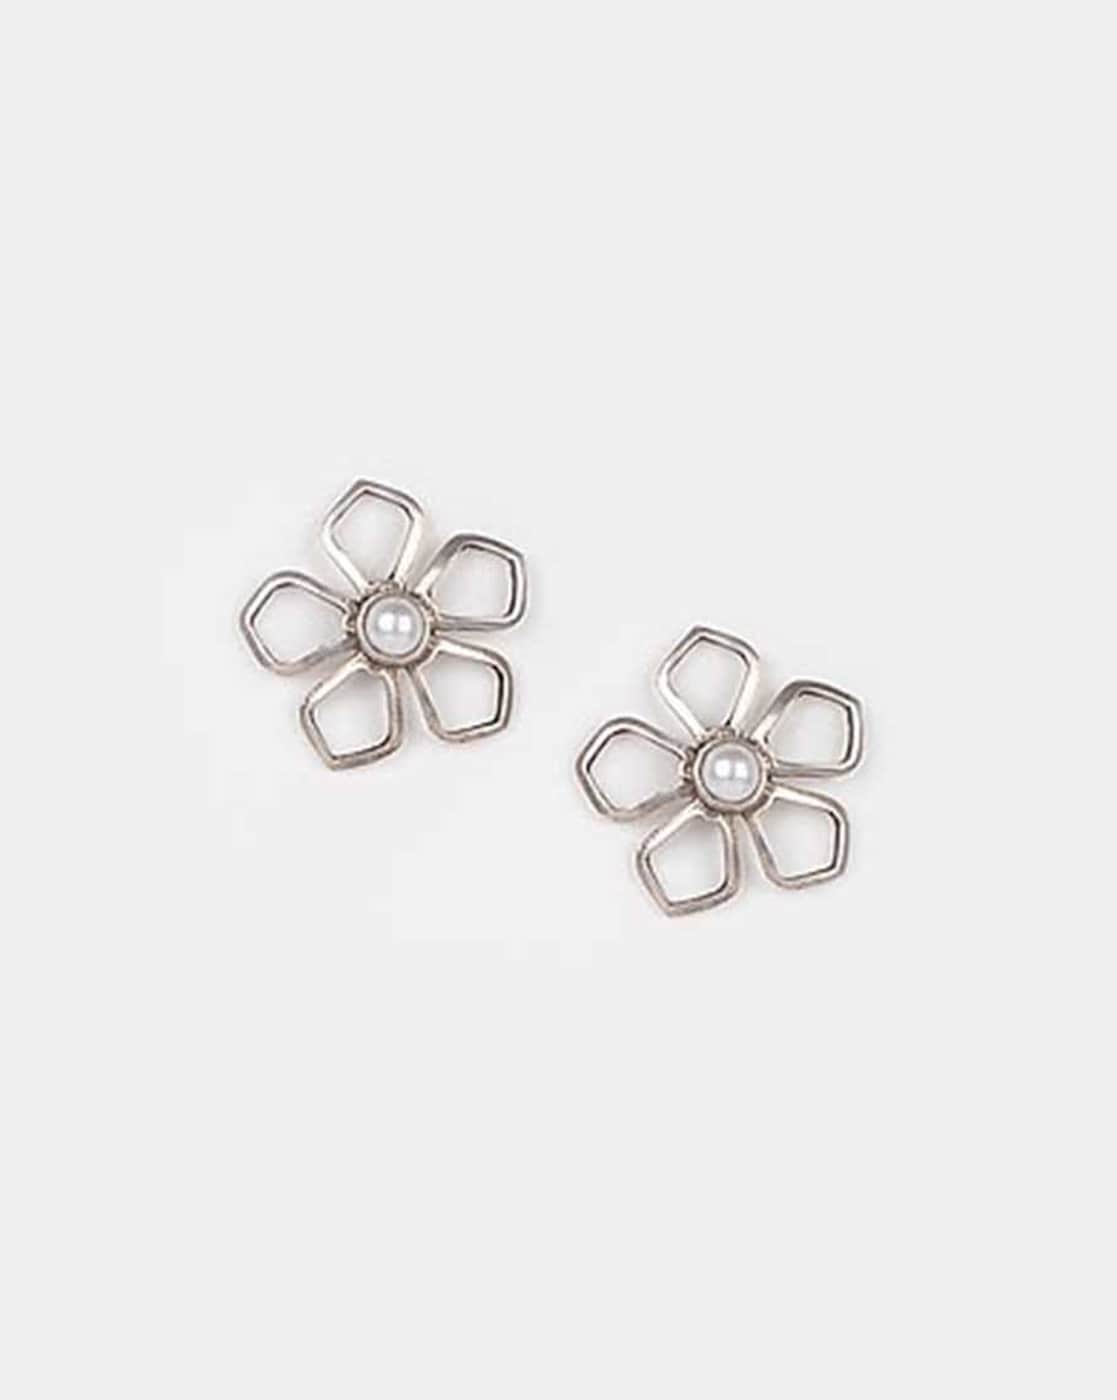 Single Black stone Flower design handmade 925 sterling silver stud earring  best daily use vintage style jewelry from India ear1207  TRIBAL ORNAMENTS